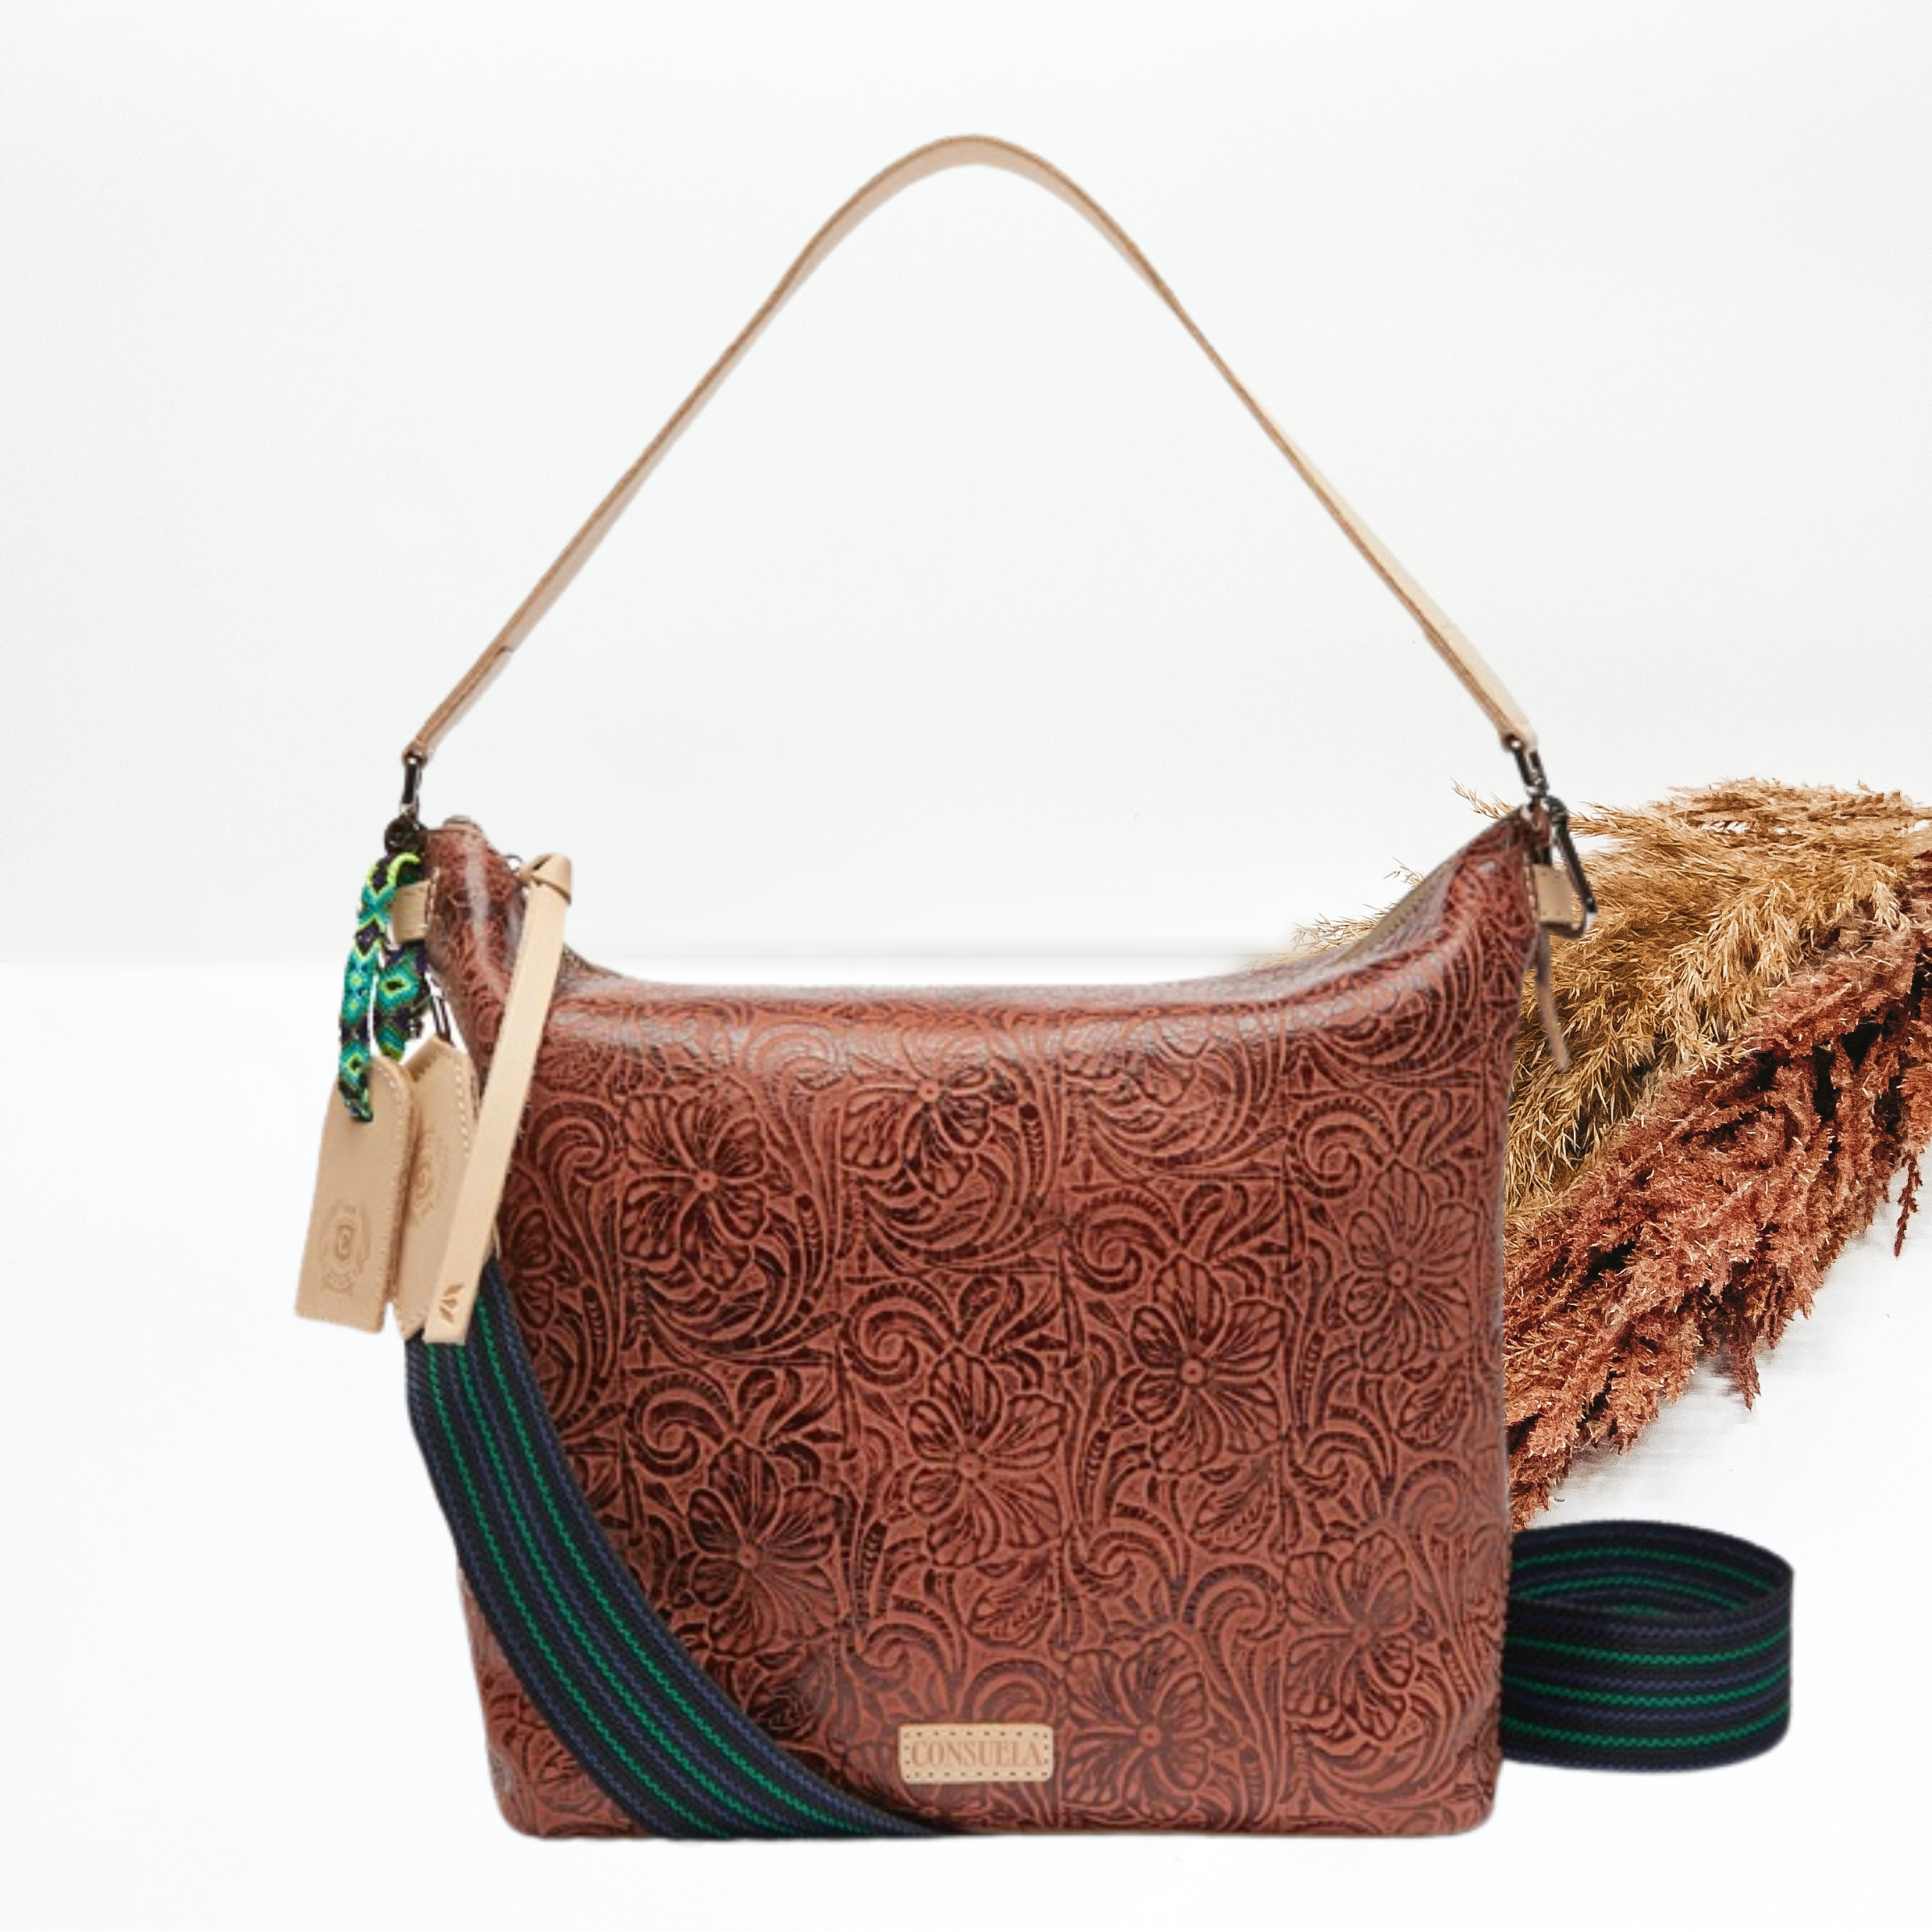 Pictured is hobo purse that has a tooled leather all over deisgn. This purse includes a thick, light tan strap and striped, thick purse strap. This purse is pictured on a white background with pompous grass on the right side of the picture.